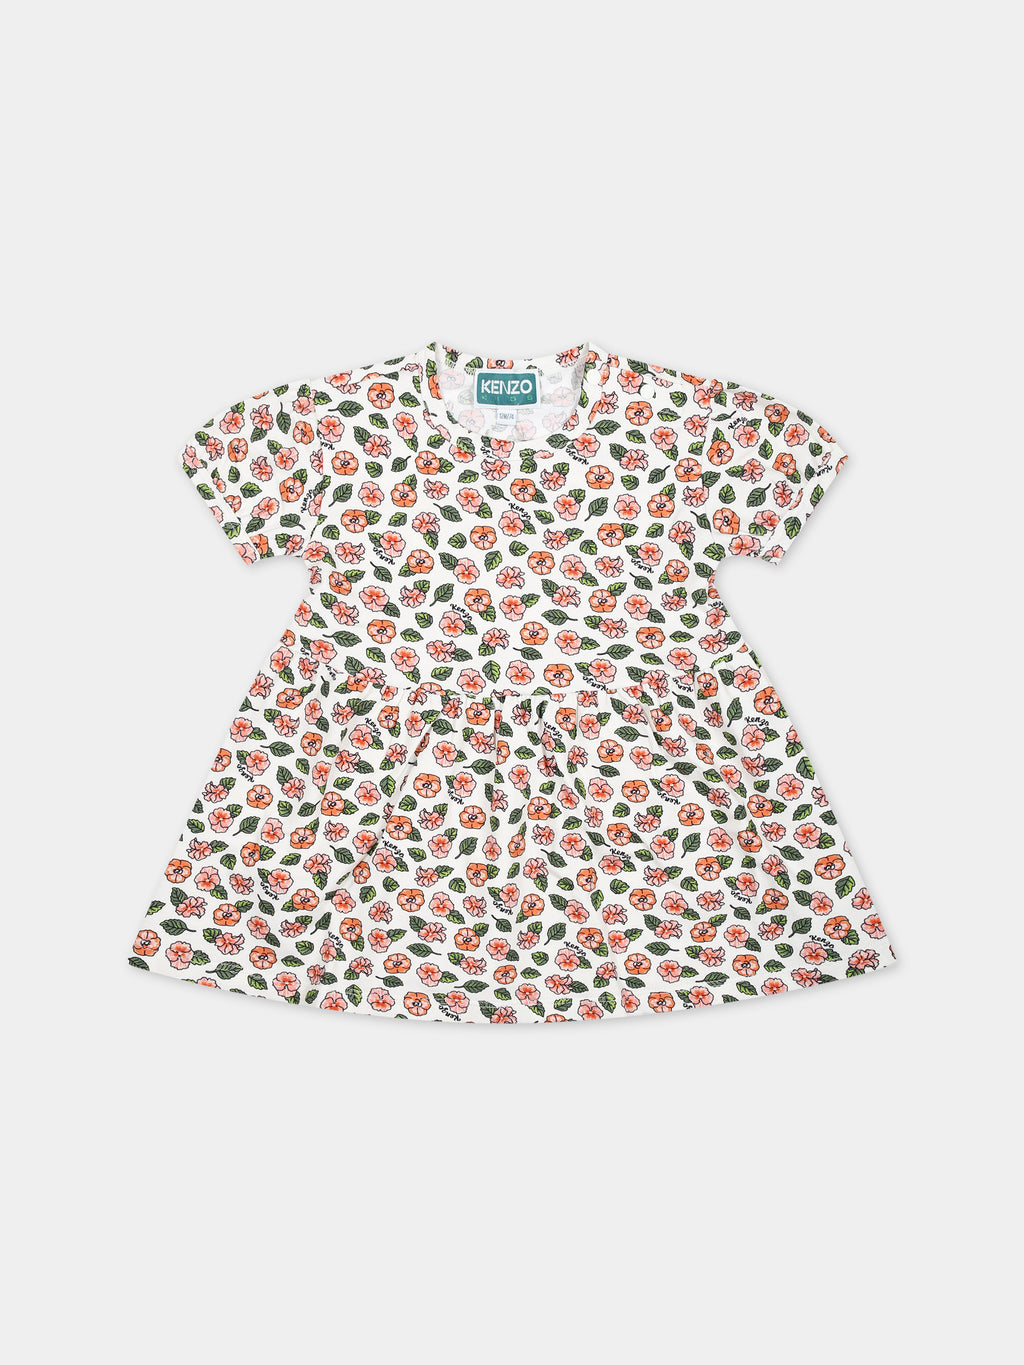 White dress for baby with floral print